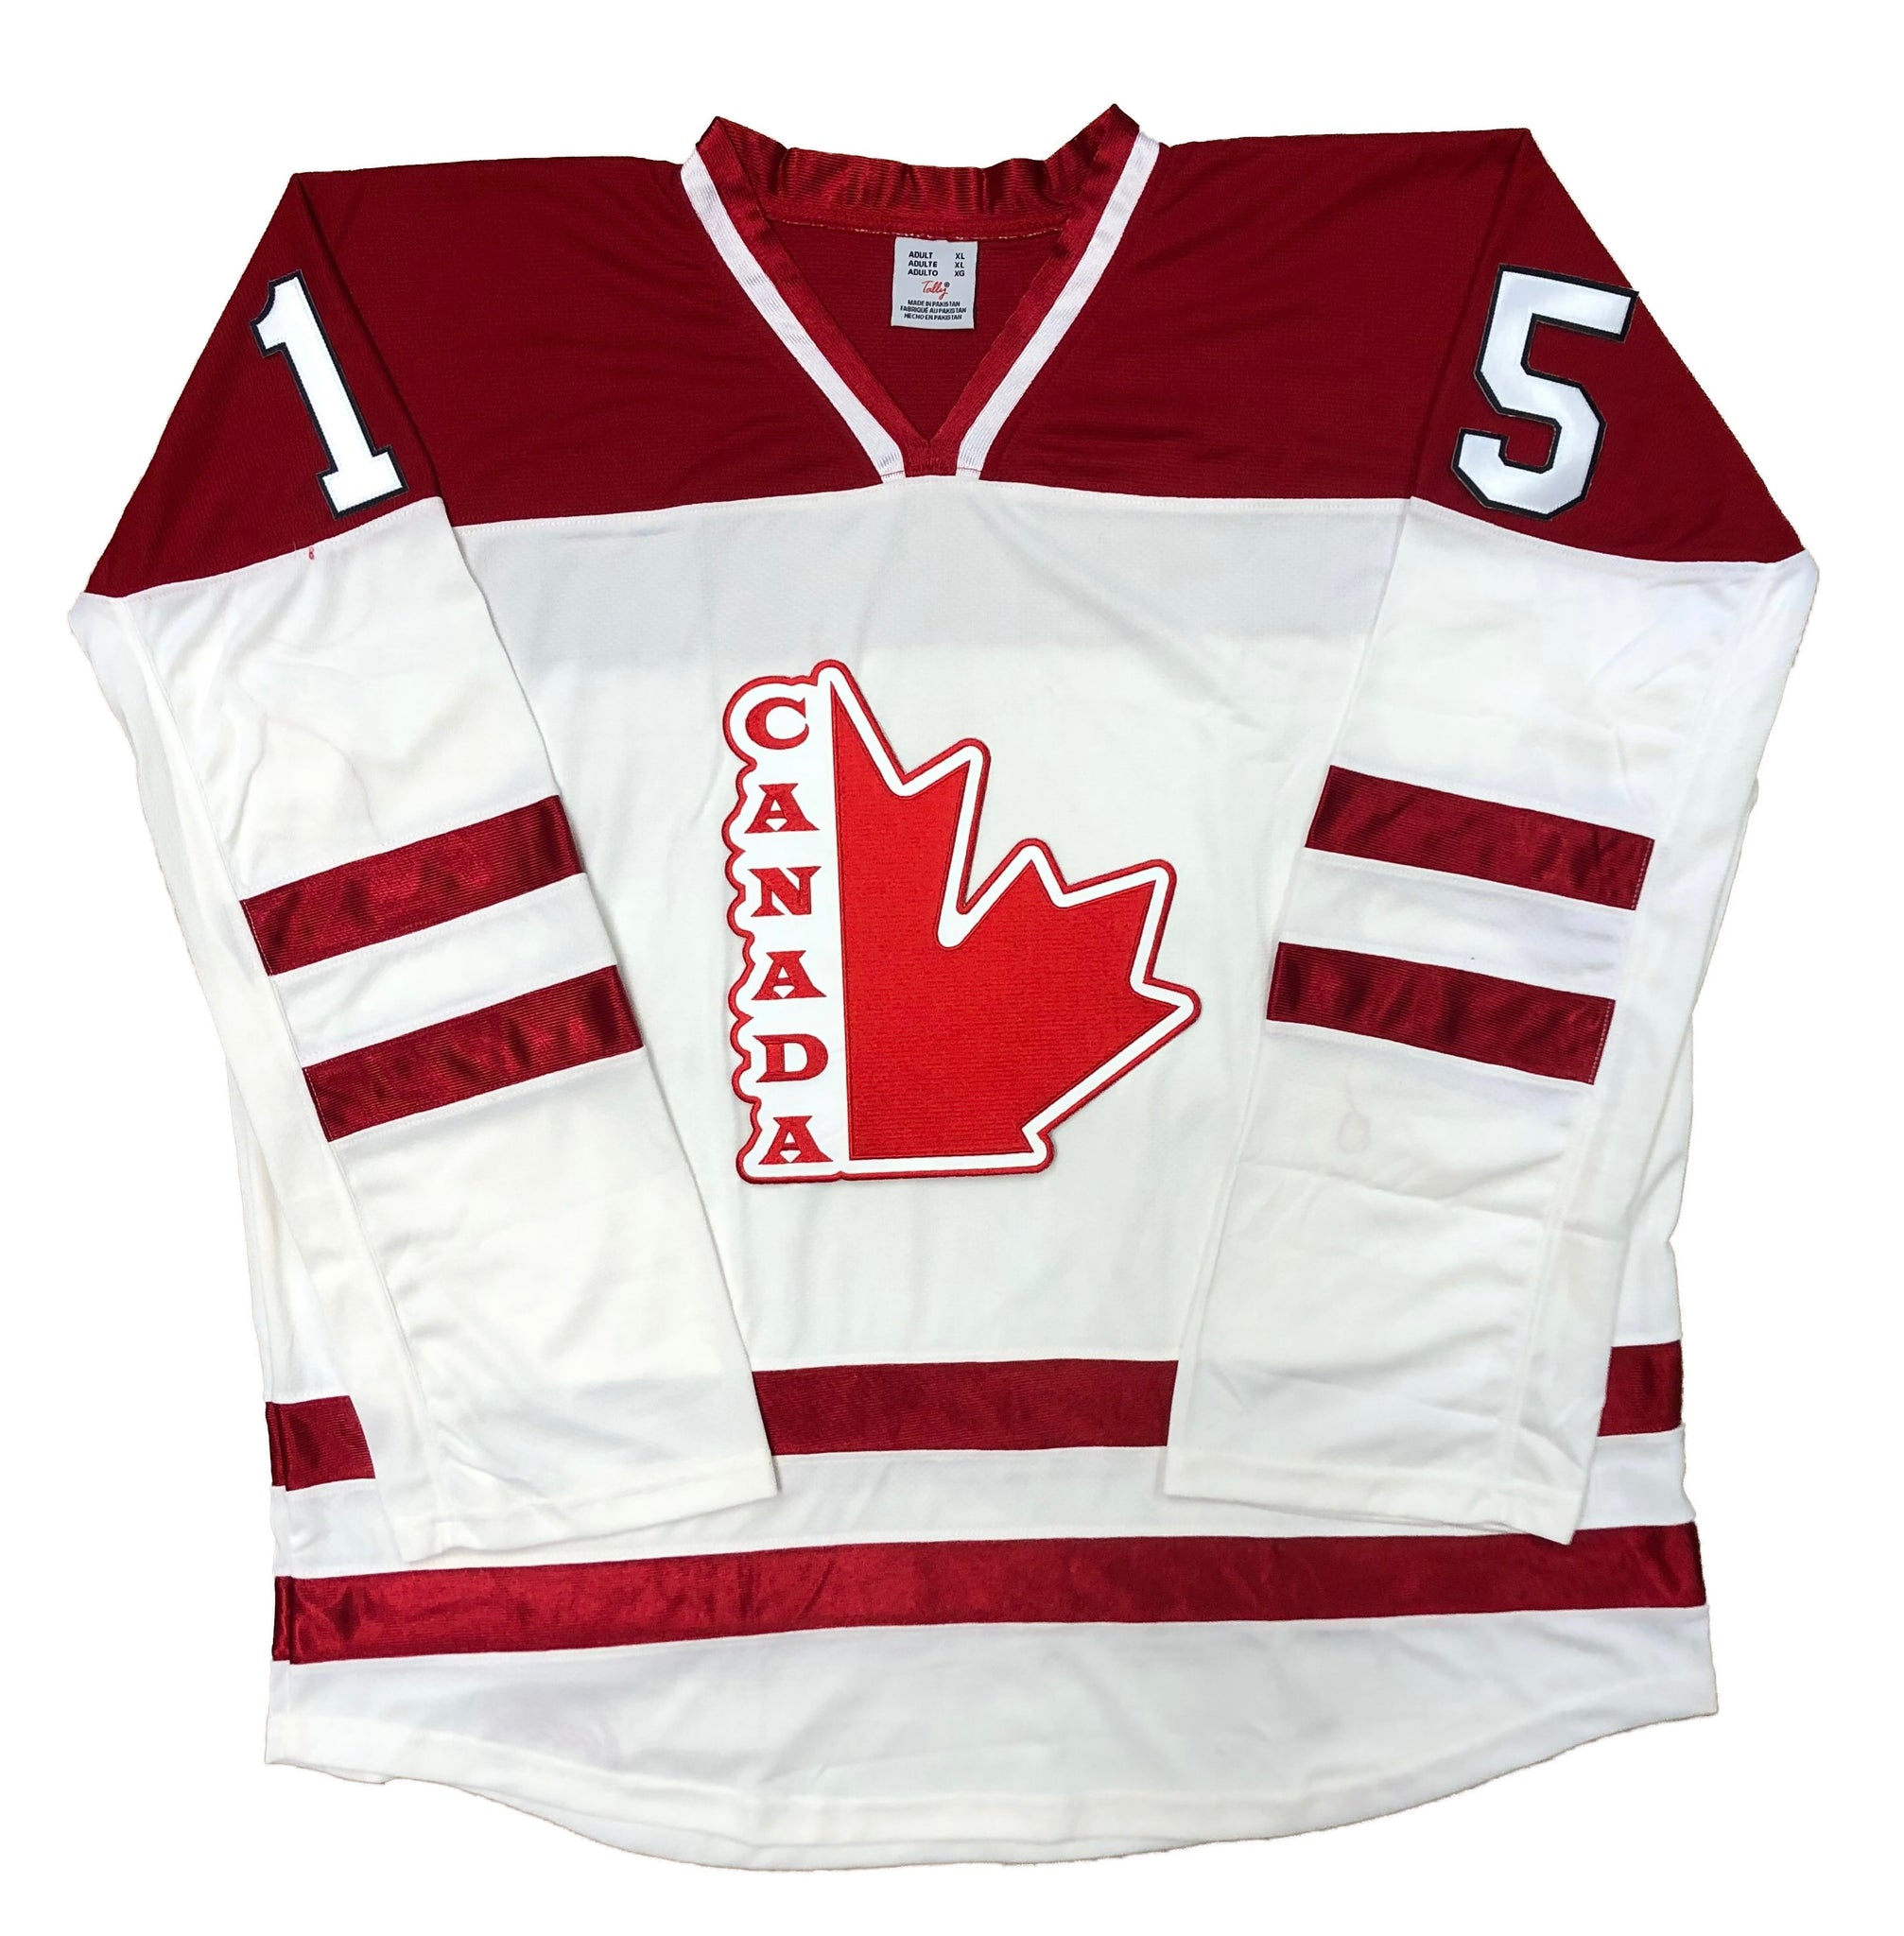 Custom Hockey Jerseys with a Team Canada Embroidered Twill Crest